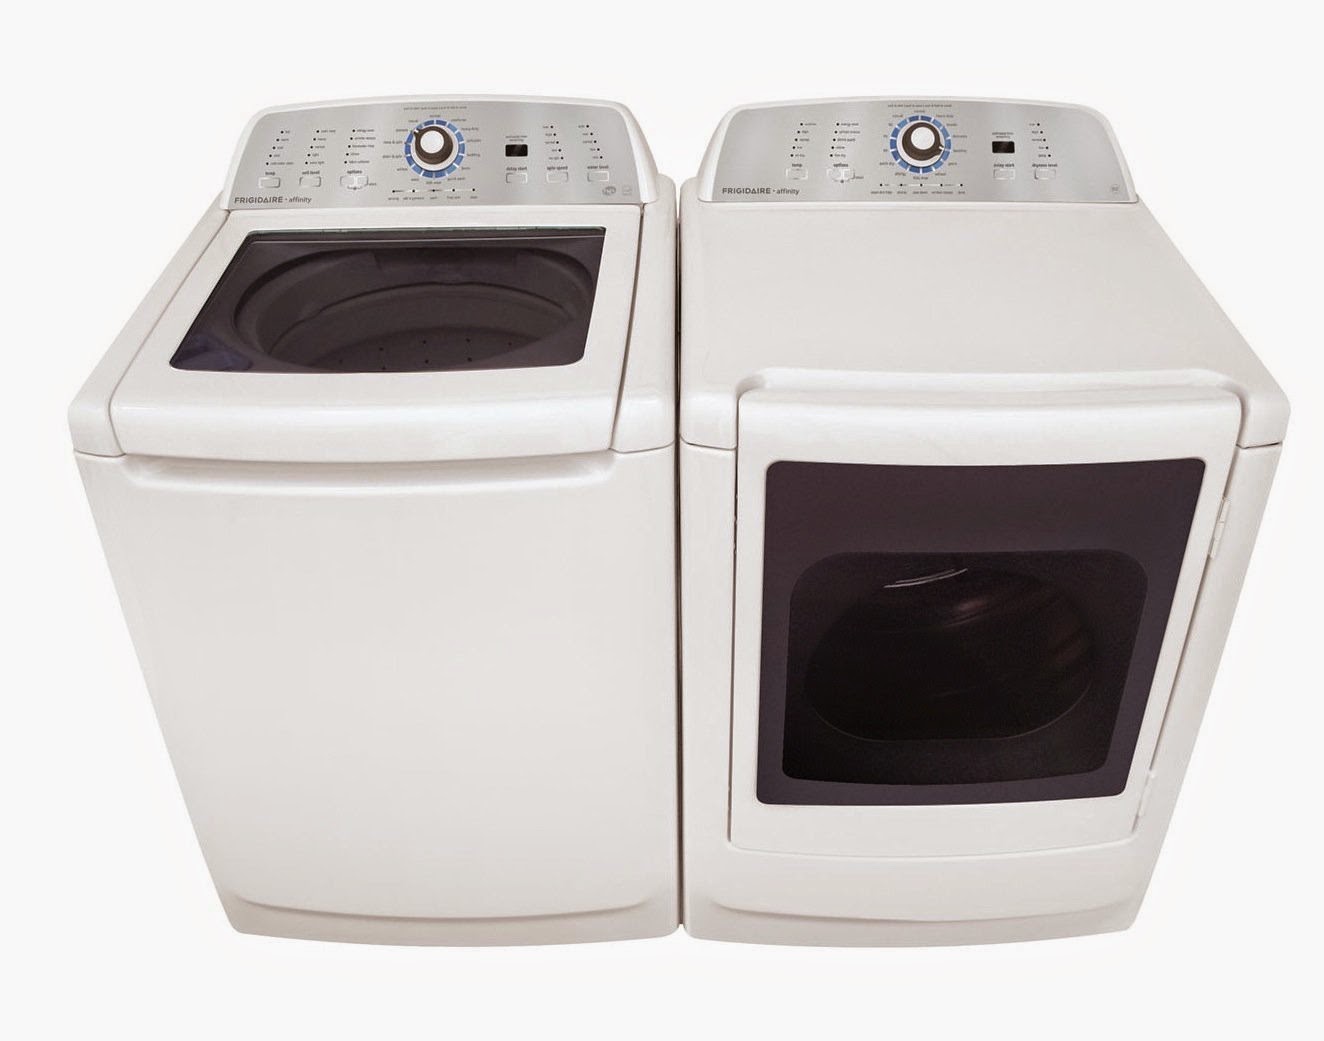 washer dryer sets cheap washer and dryer sets